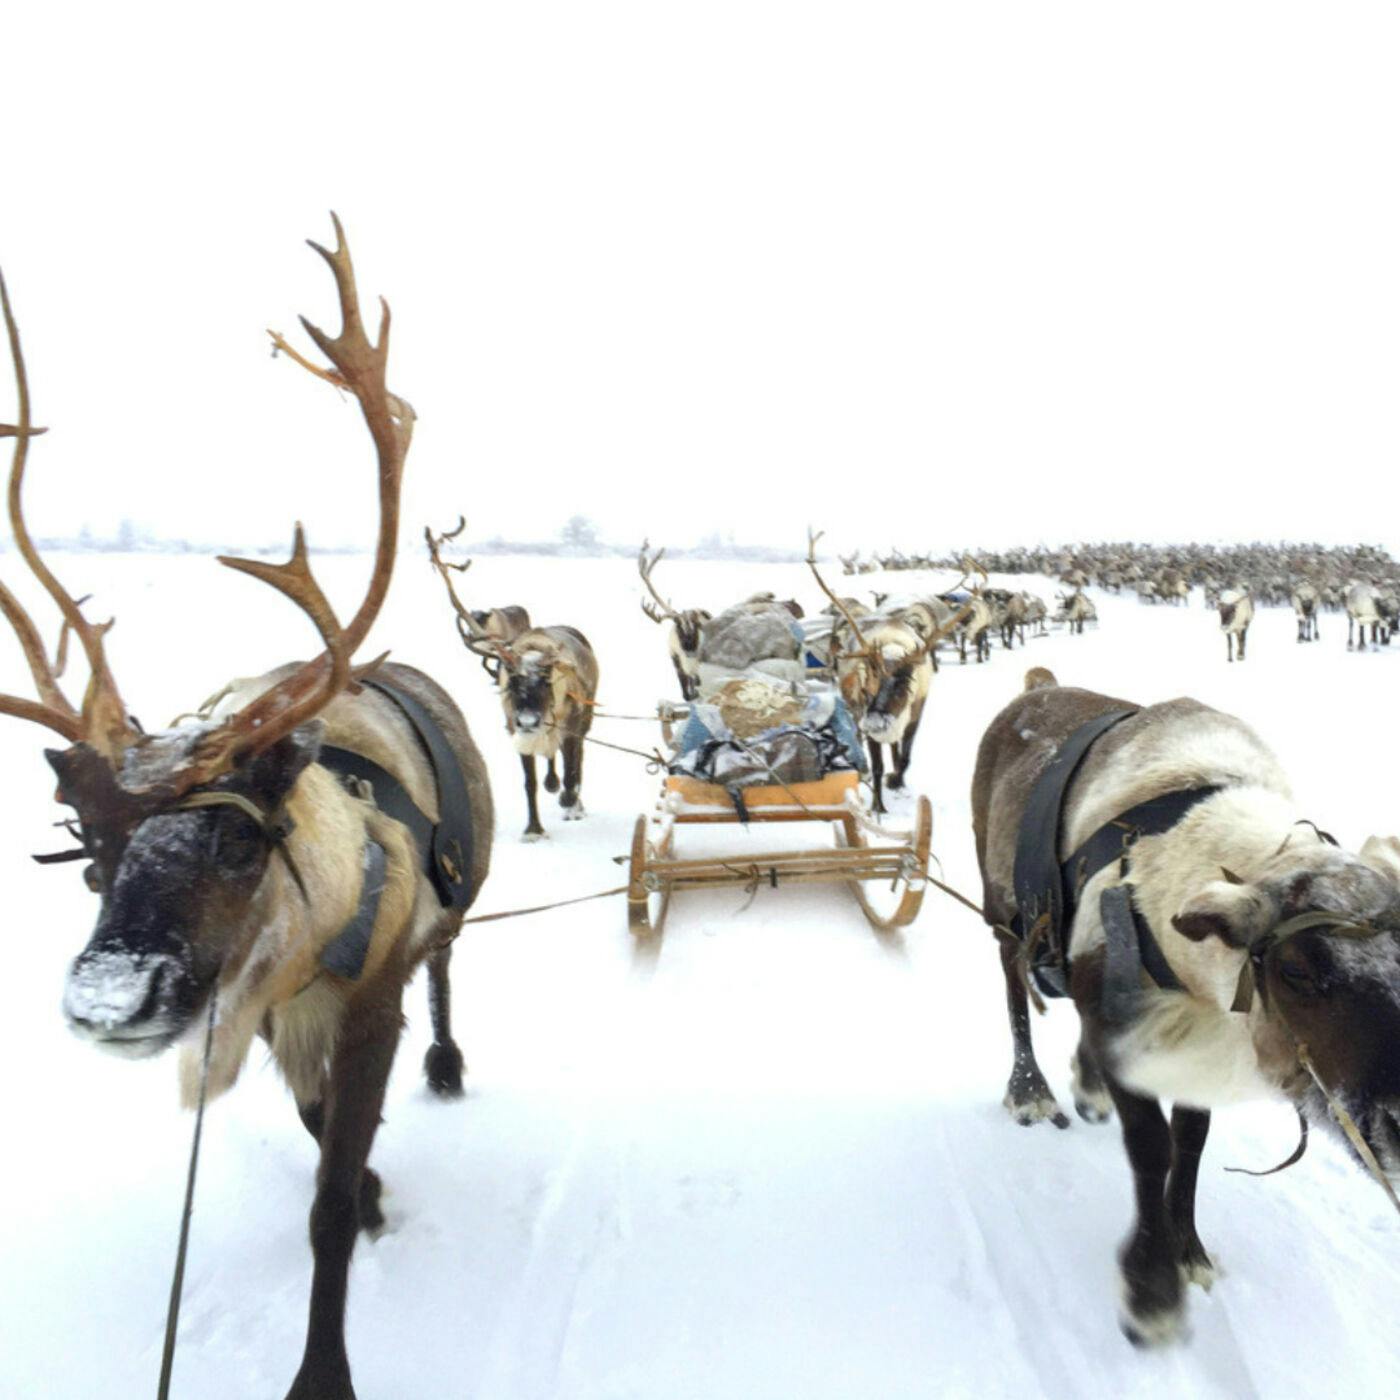 The Herd at the End of the World: Traversing Siberia with the Nenet Reindeer Herders